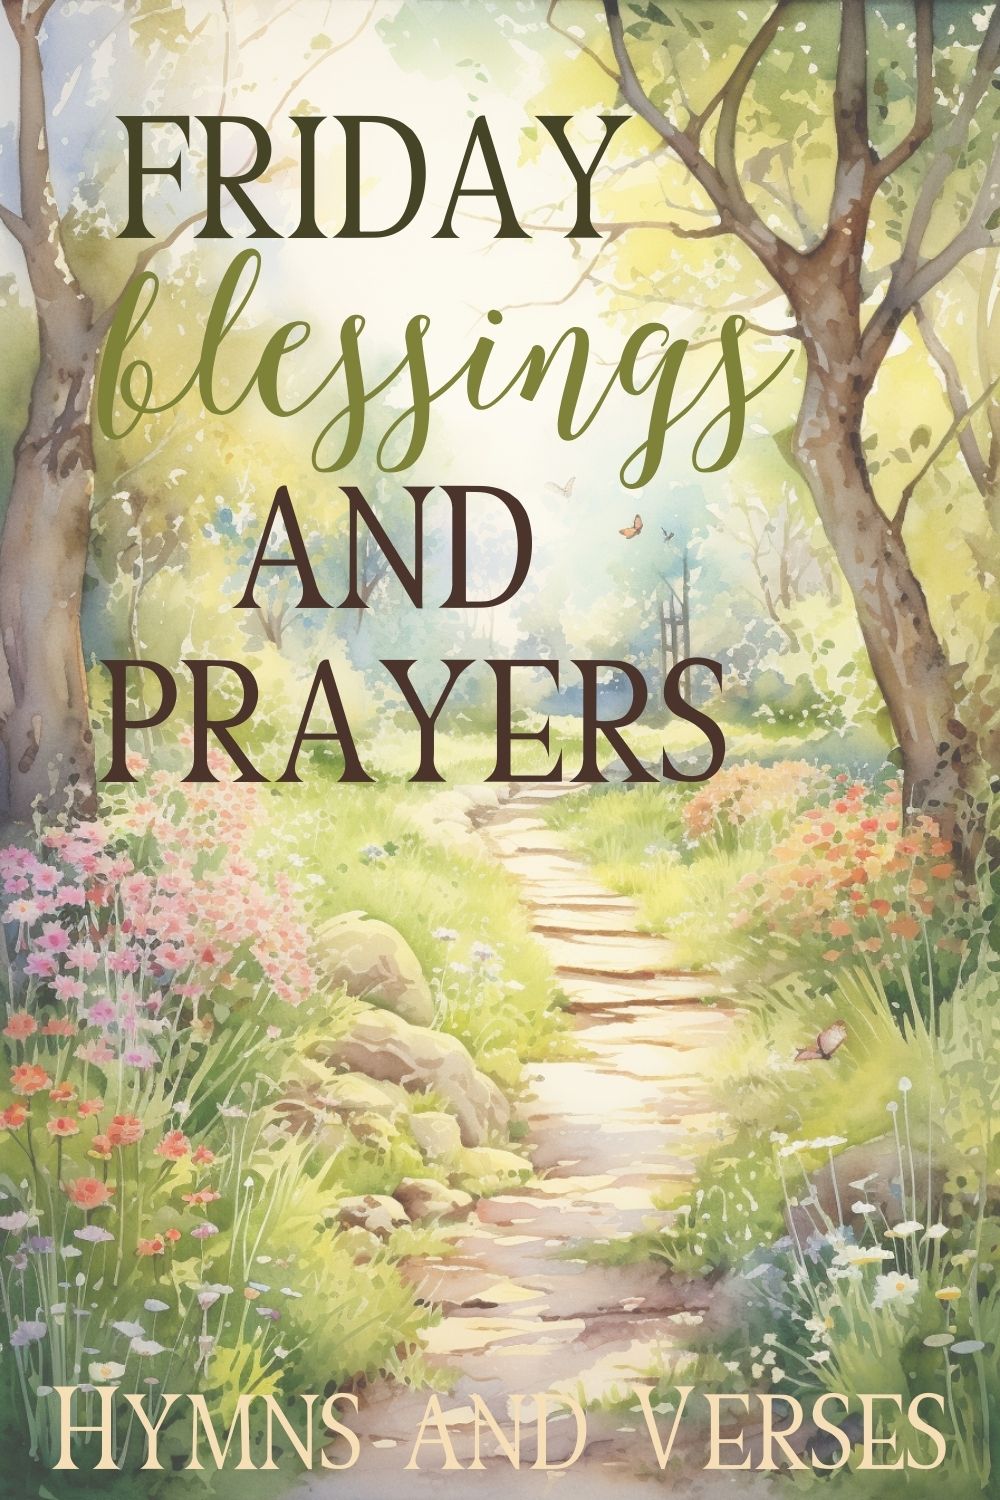 pinterest pin about Friday blessings and prayers featuring watercolor scene of a beautiful Friday morning walk in the woods